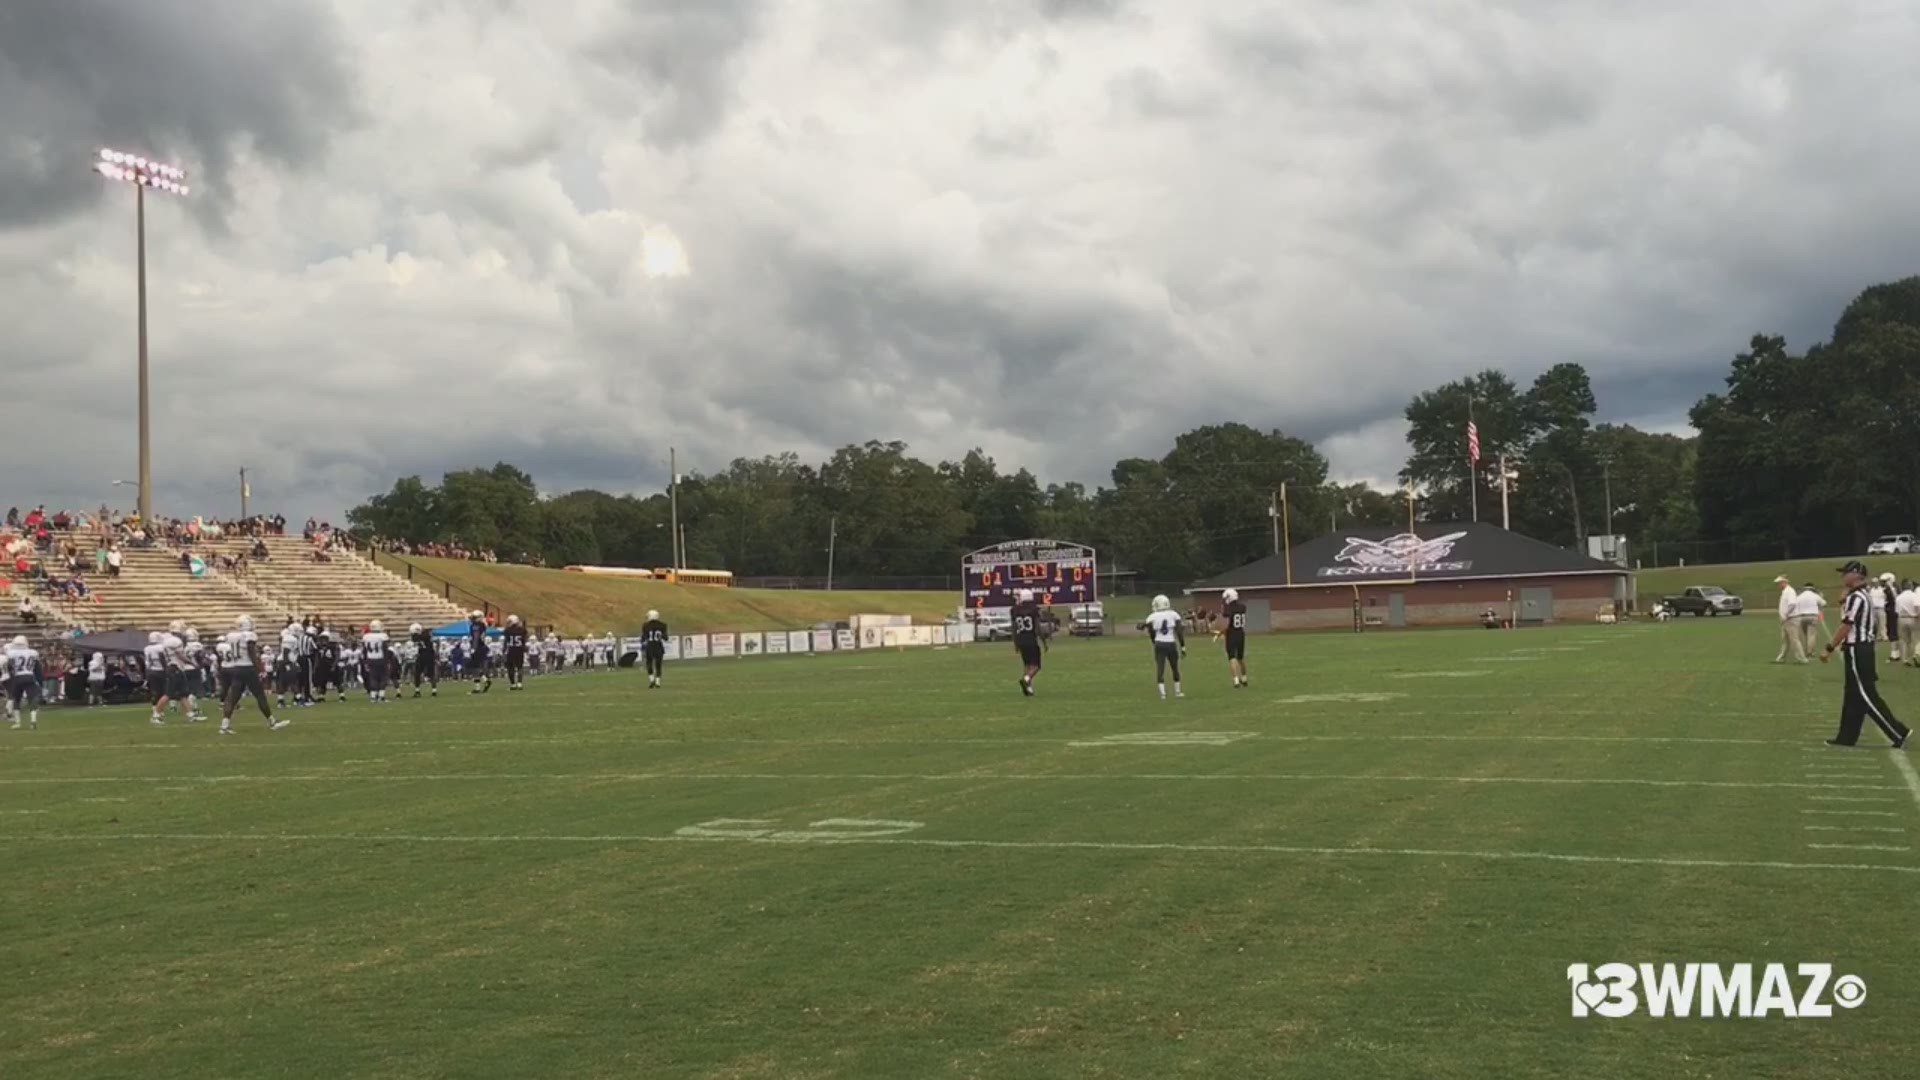 The matchup between Veterans High School and Upson Lee High School was temporarily stopped for a lightning delay.